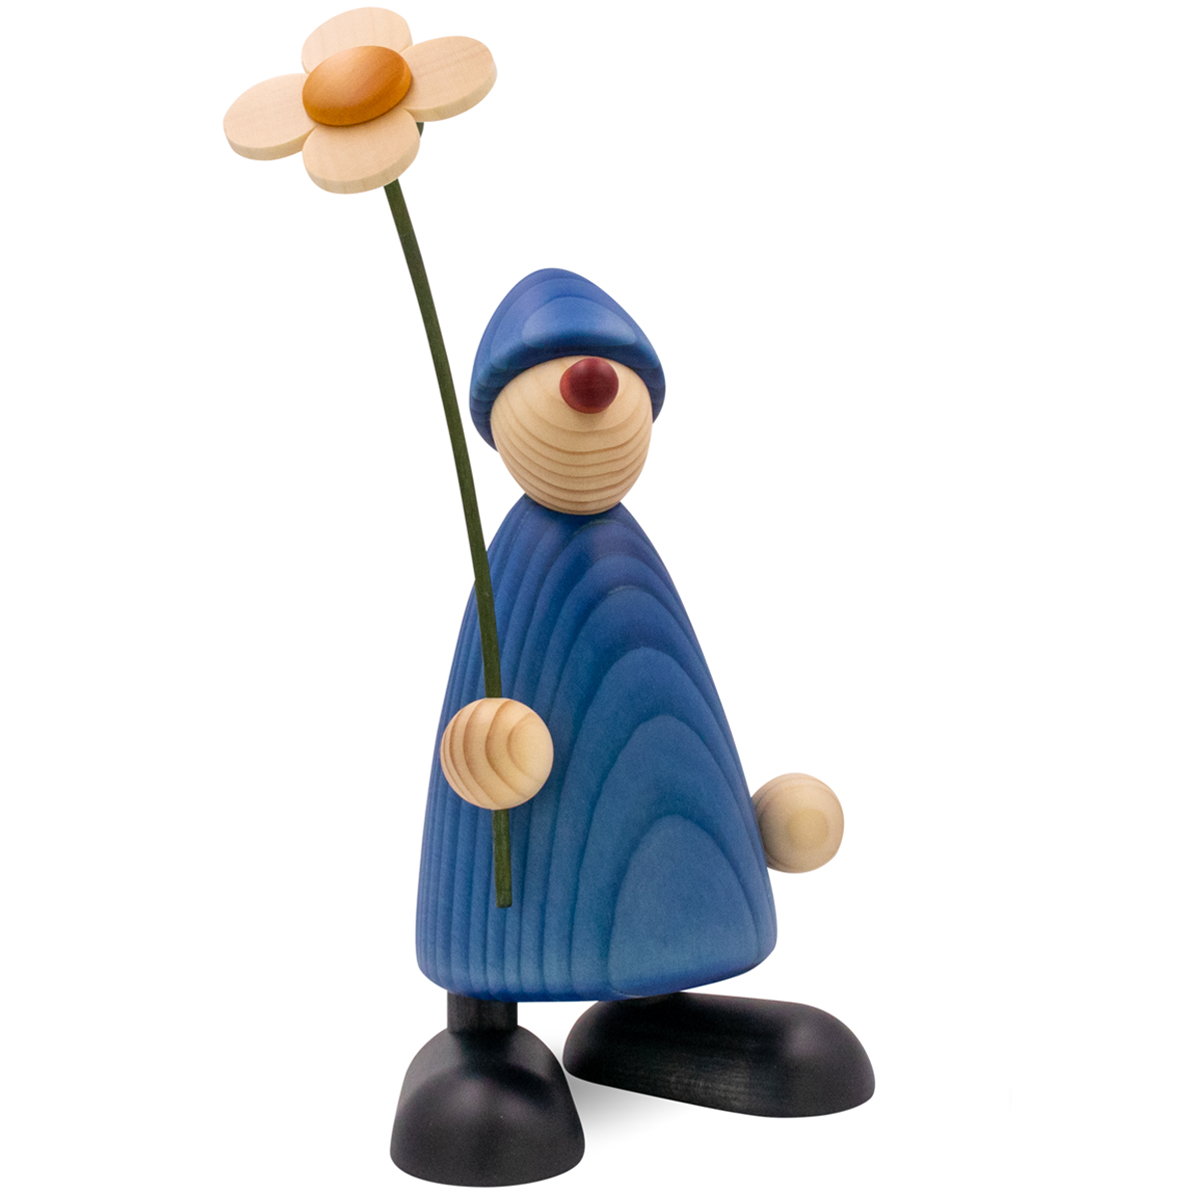 Well-Wisher Phillip standing with flower, large, blue